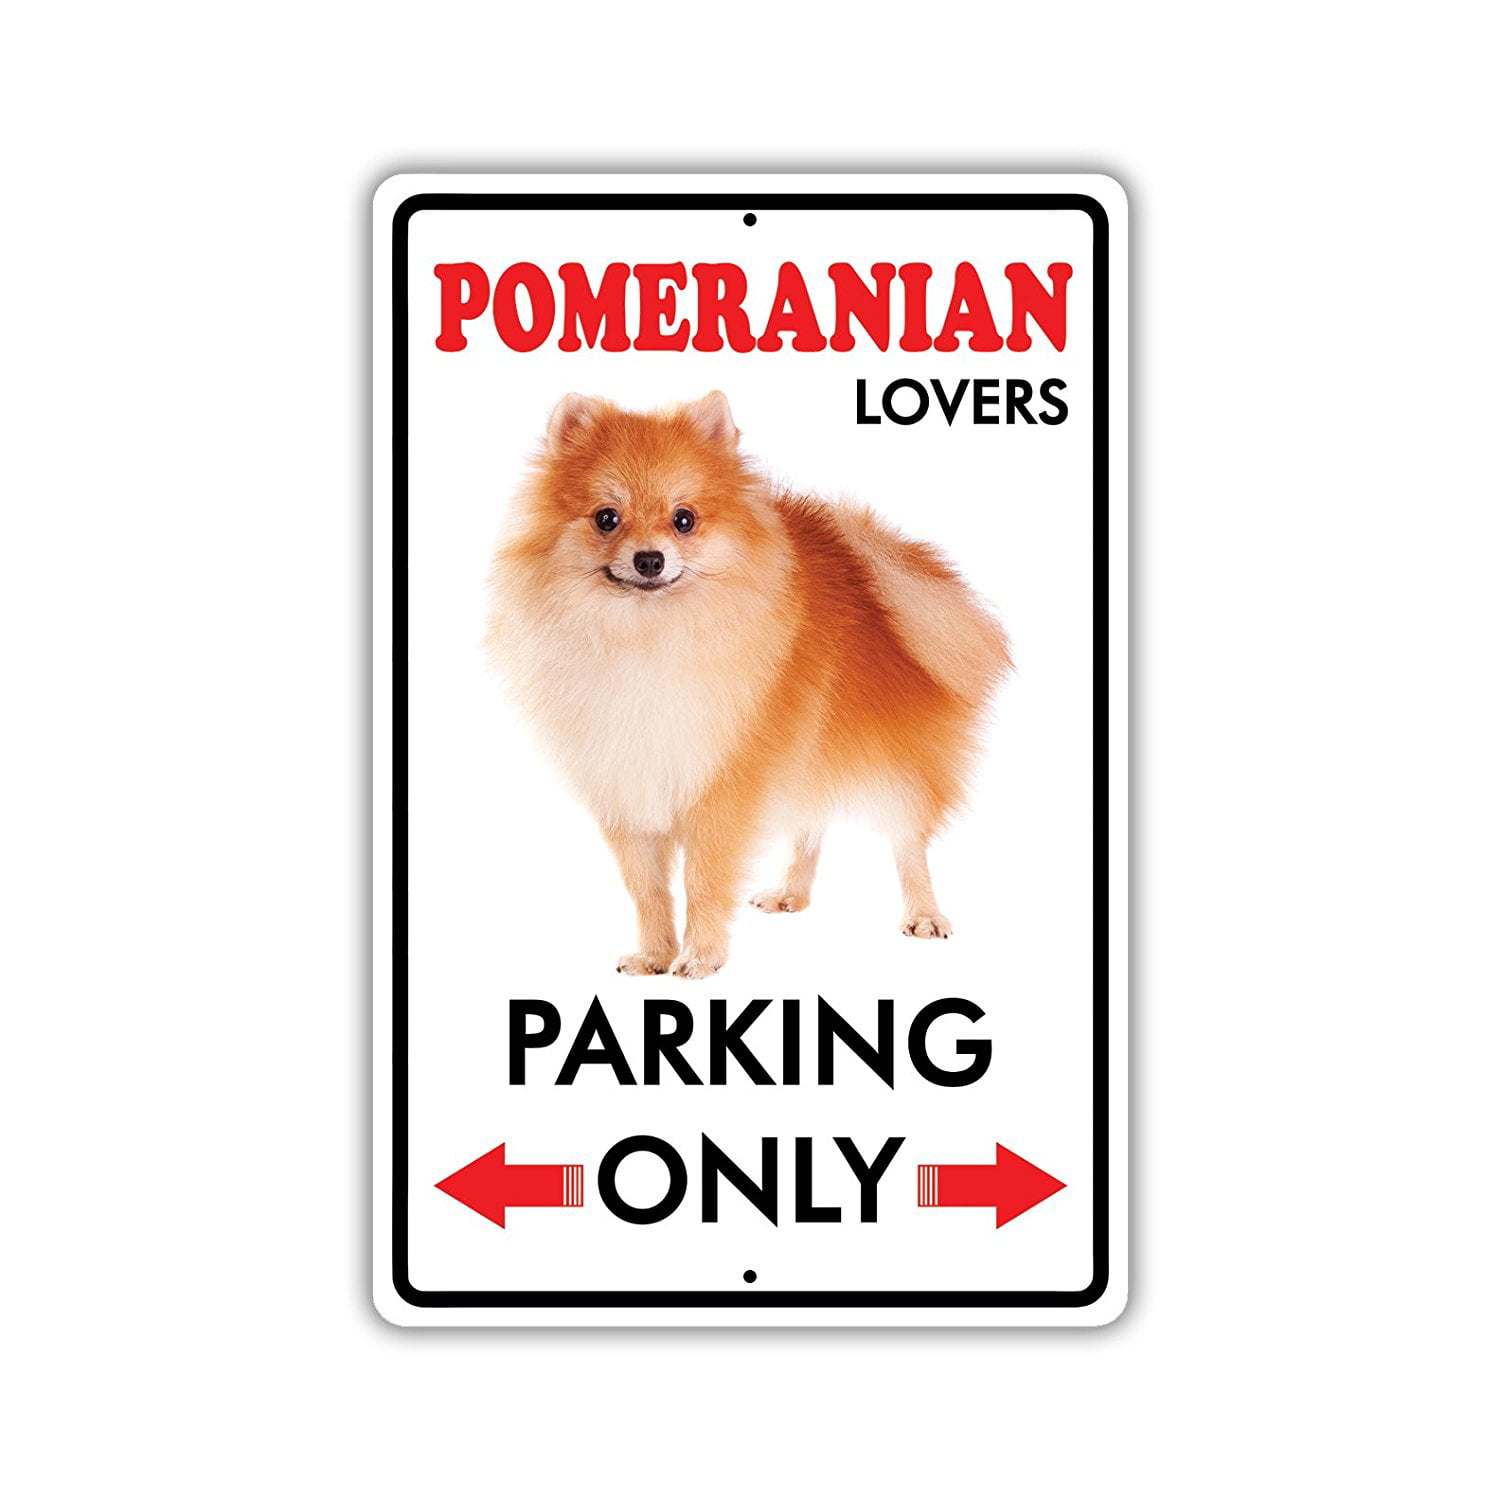 Parking For Dog Lovers Others Growled 12X18 Aluminum Metal Sign 